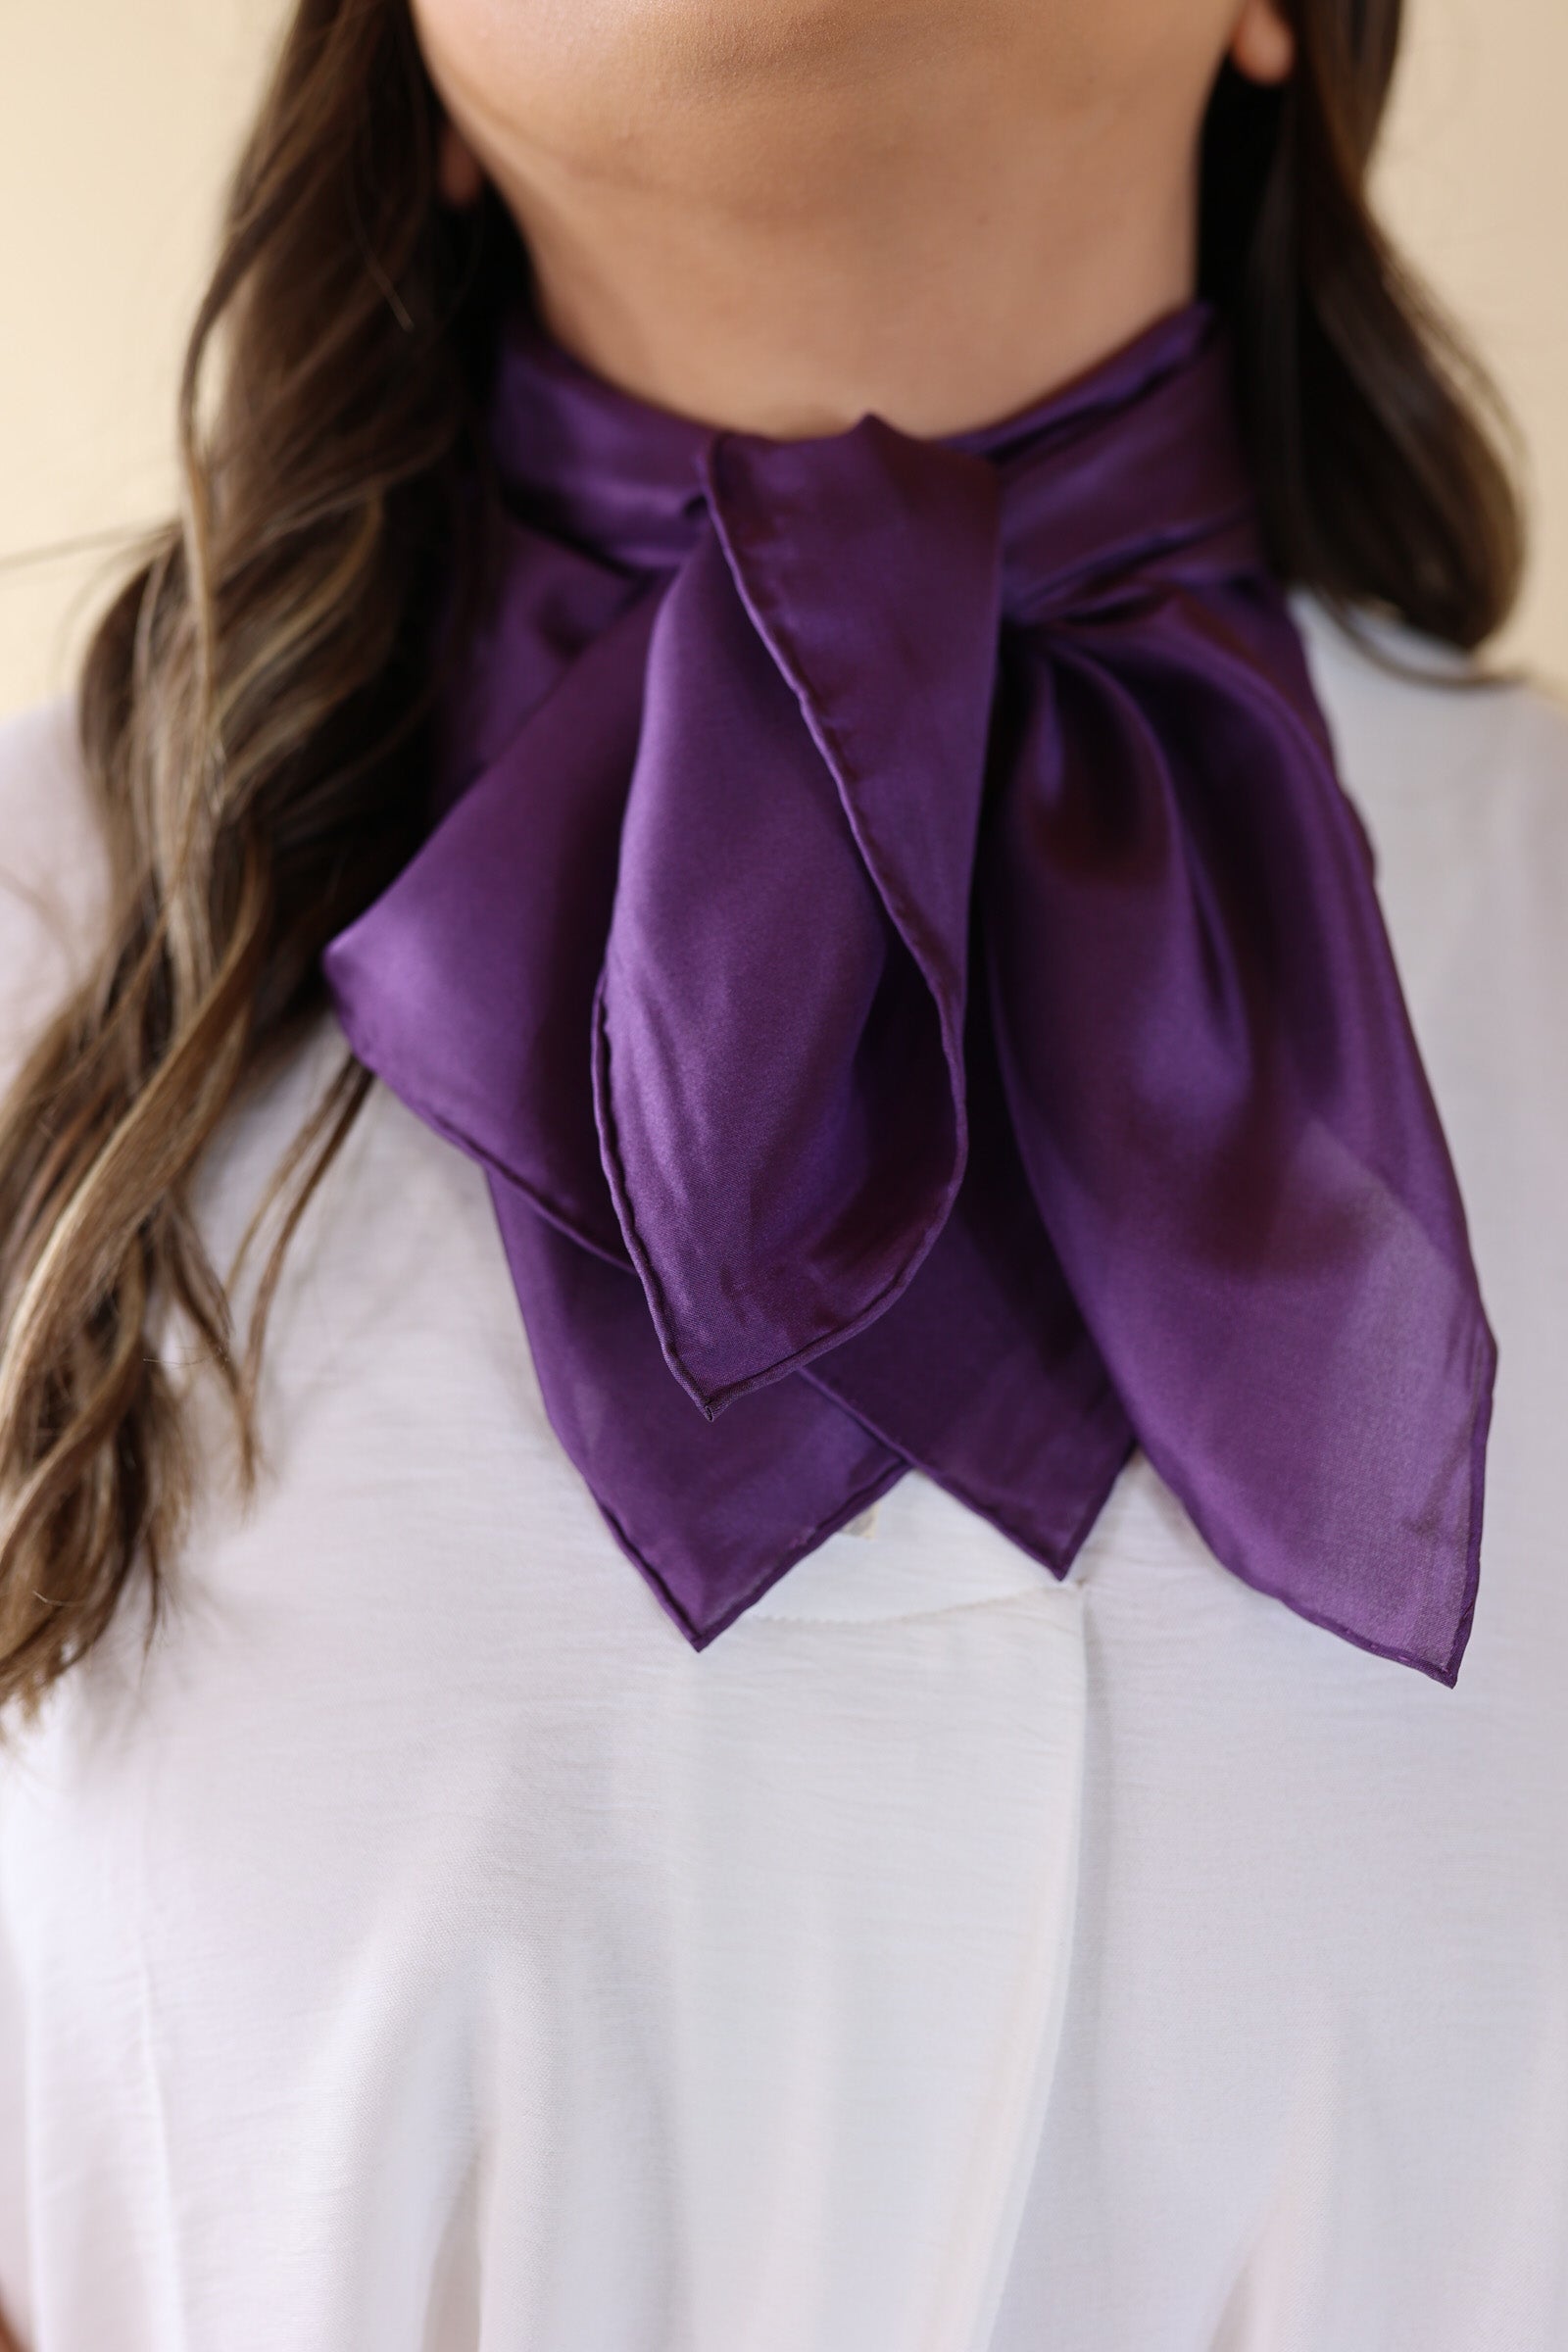 Solid Wild Rag in Plum Purple - Giddy Up Glamour Boutique